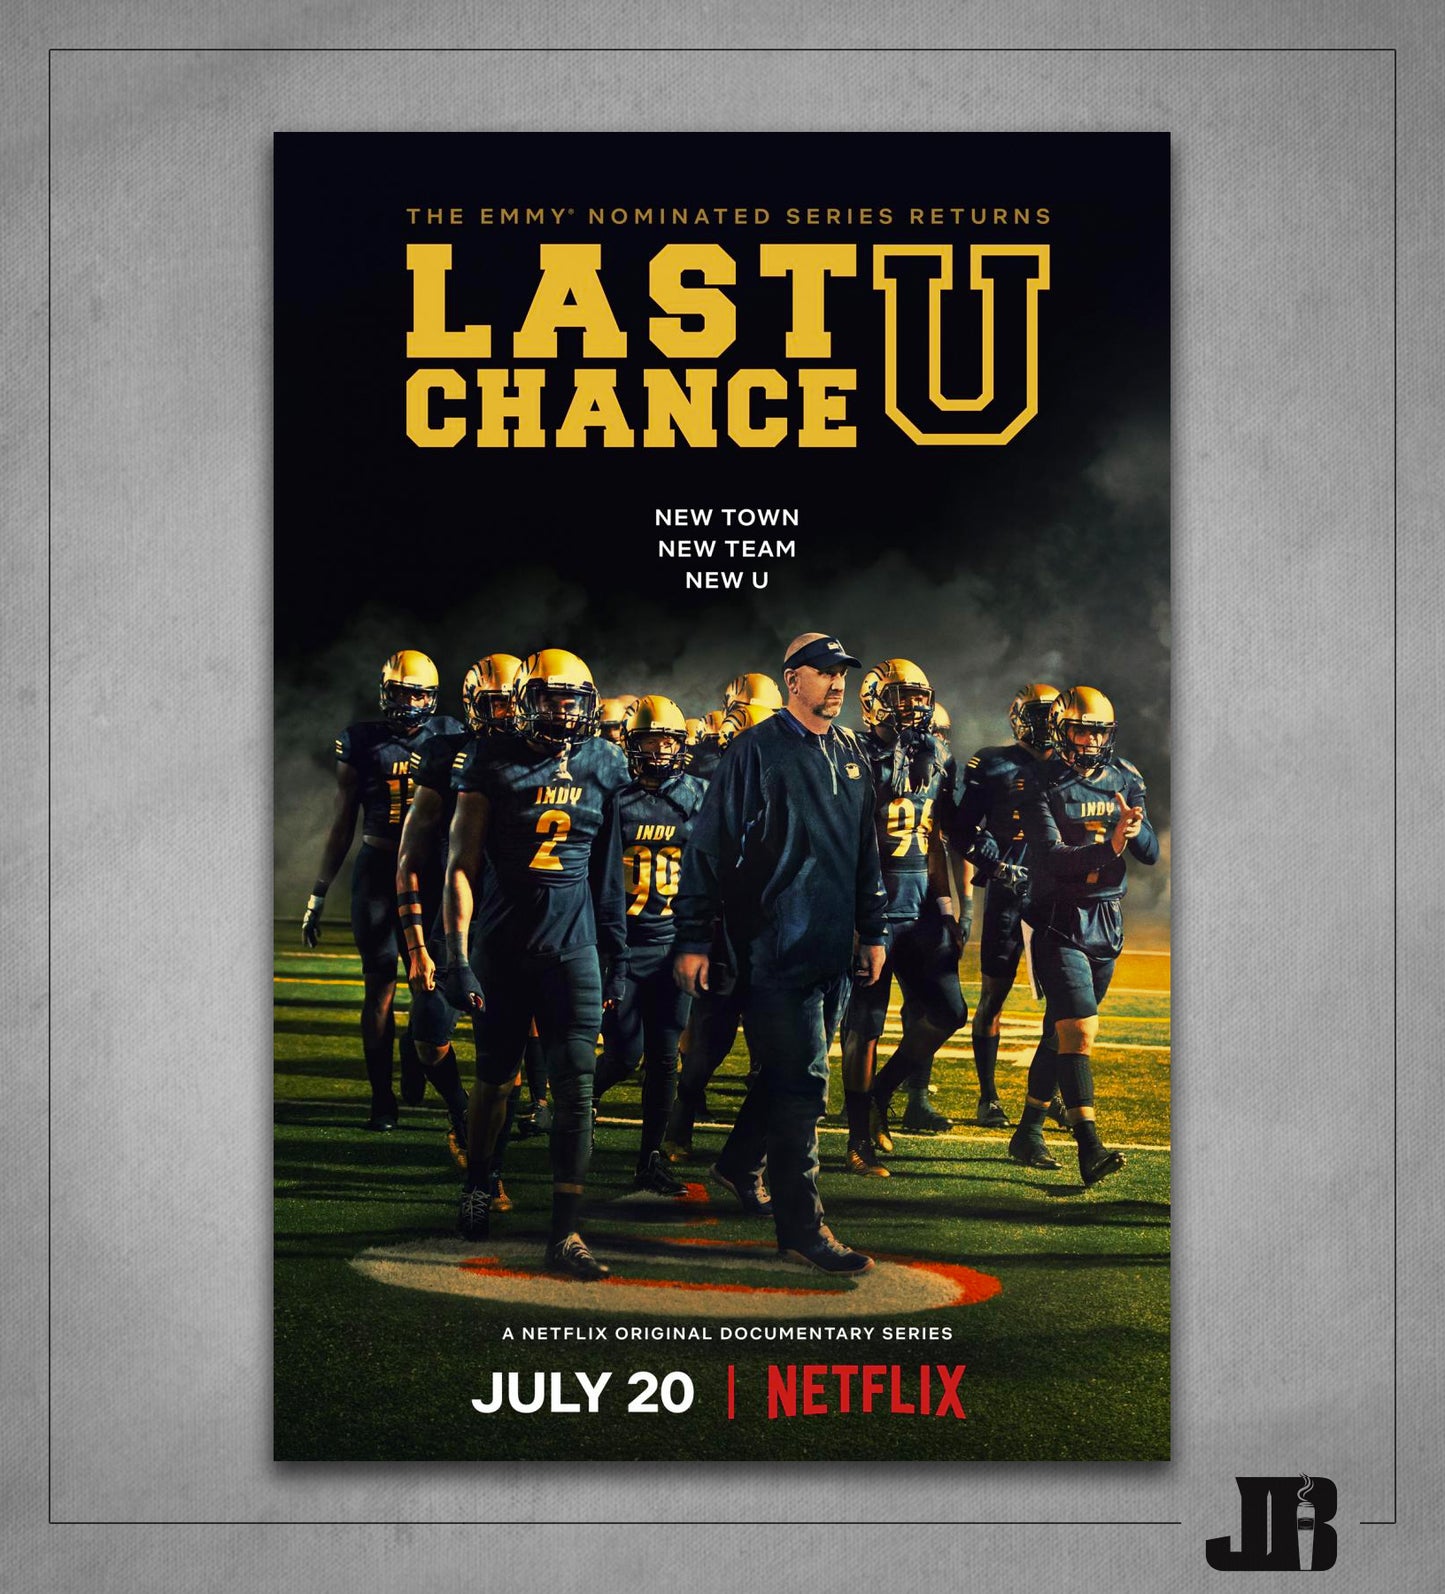 Limited Edition Coach JB Autographed Last Chance U Poster